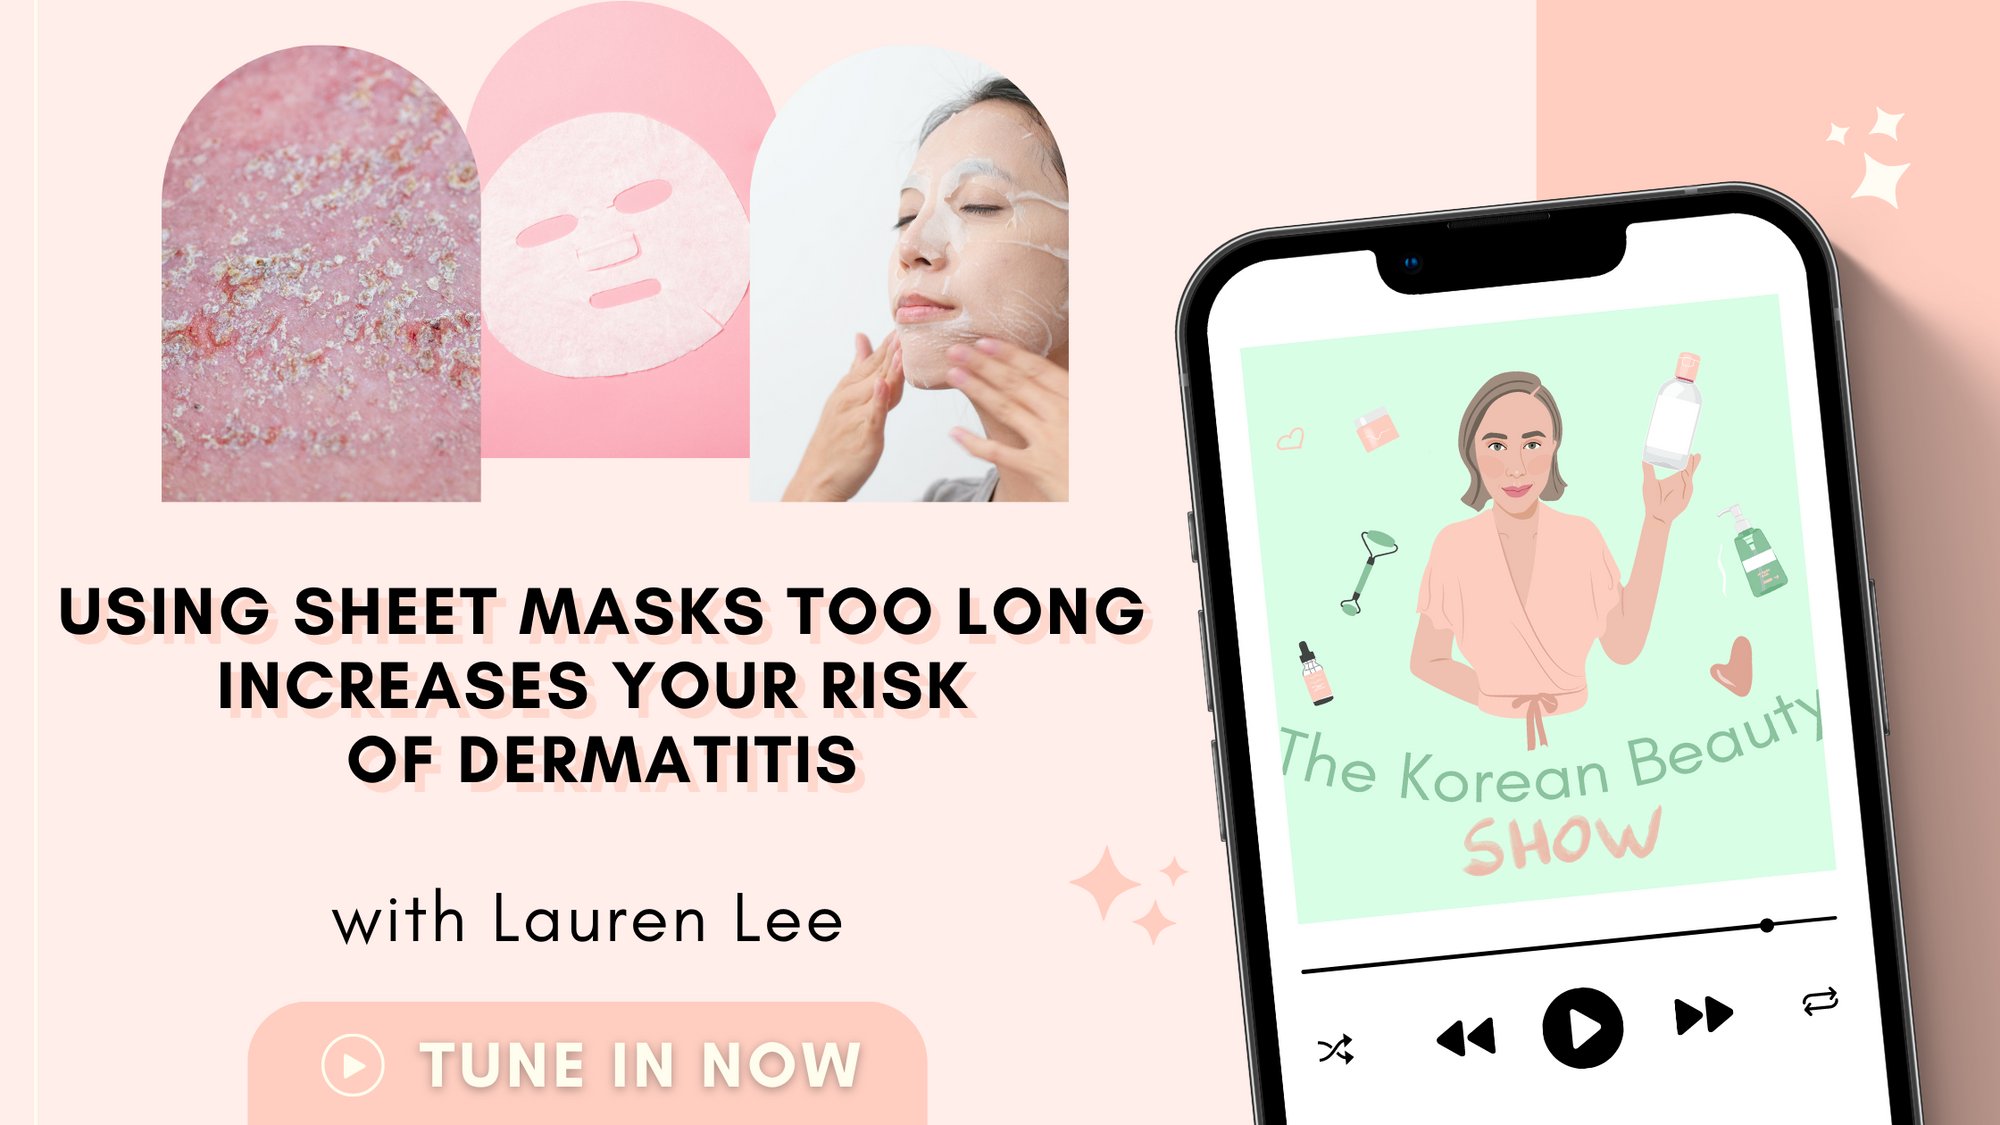 Using Sheet Masks Too Long Increases Your Risk of Dermatitis